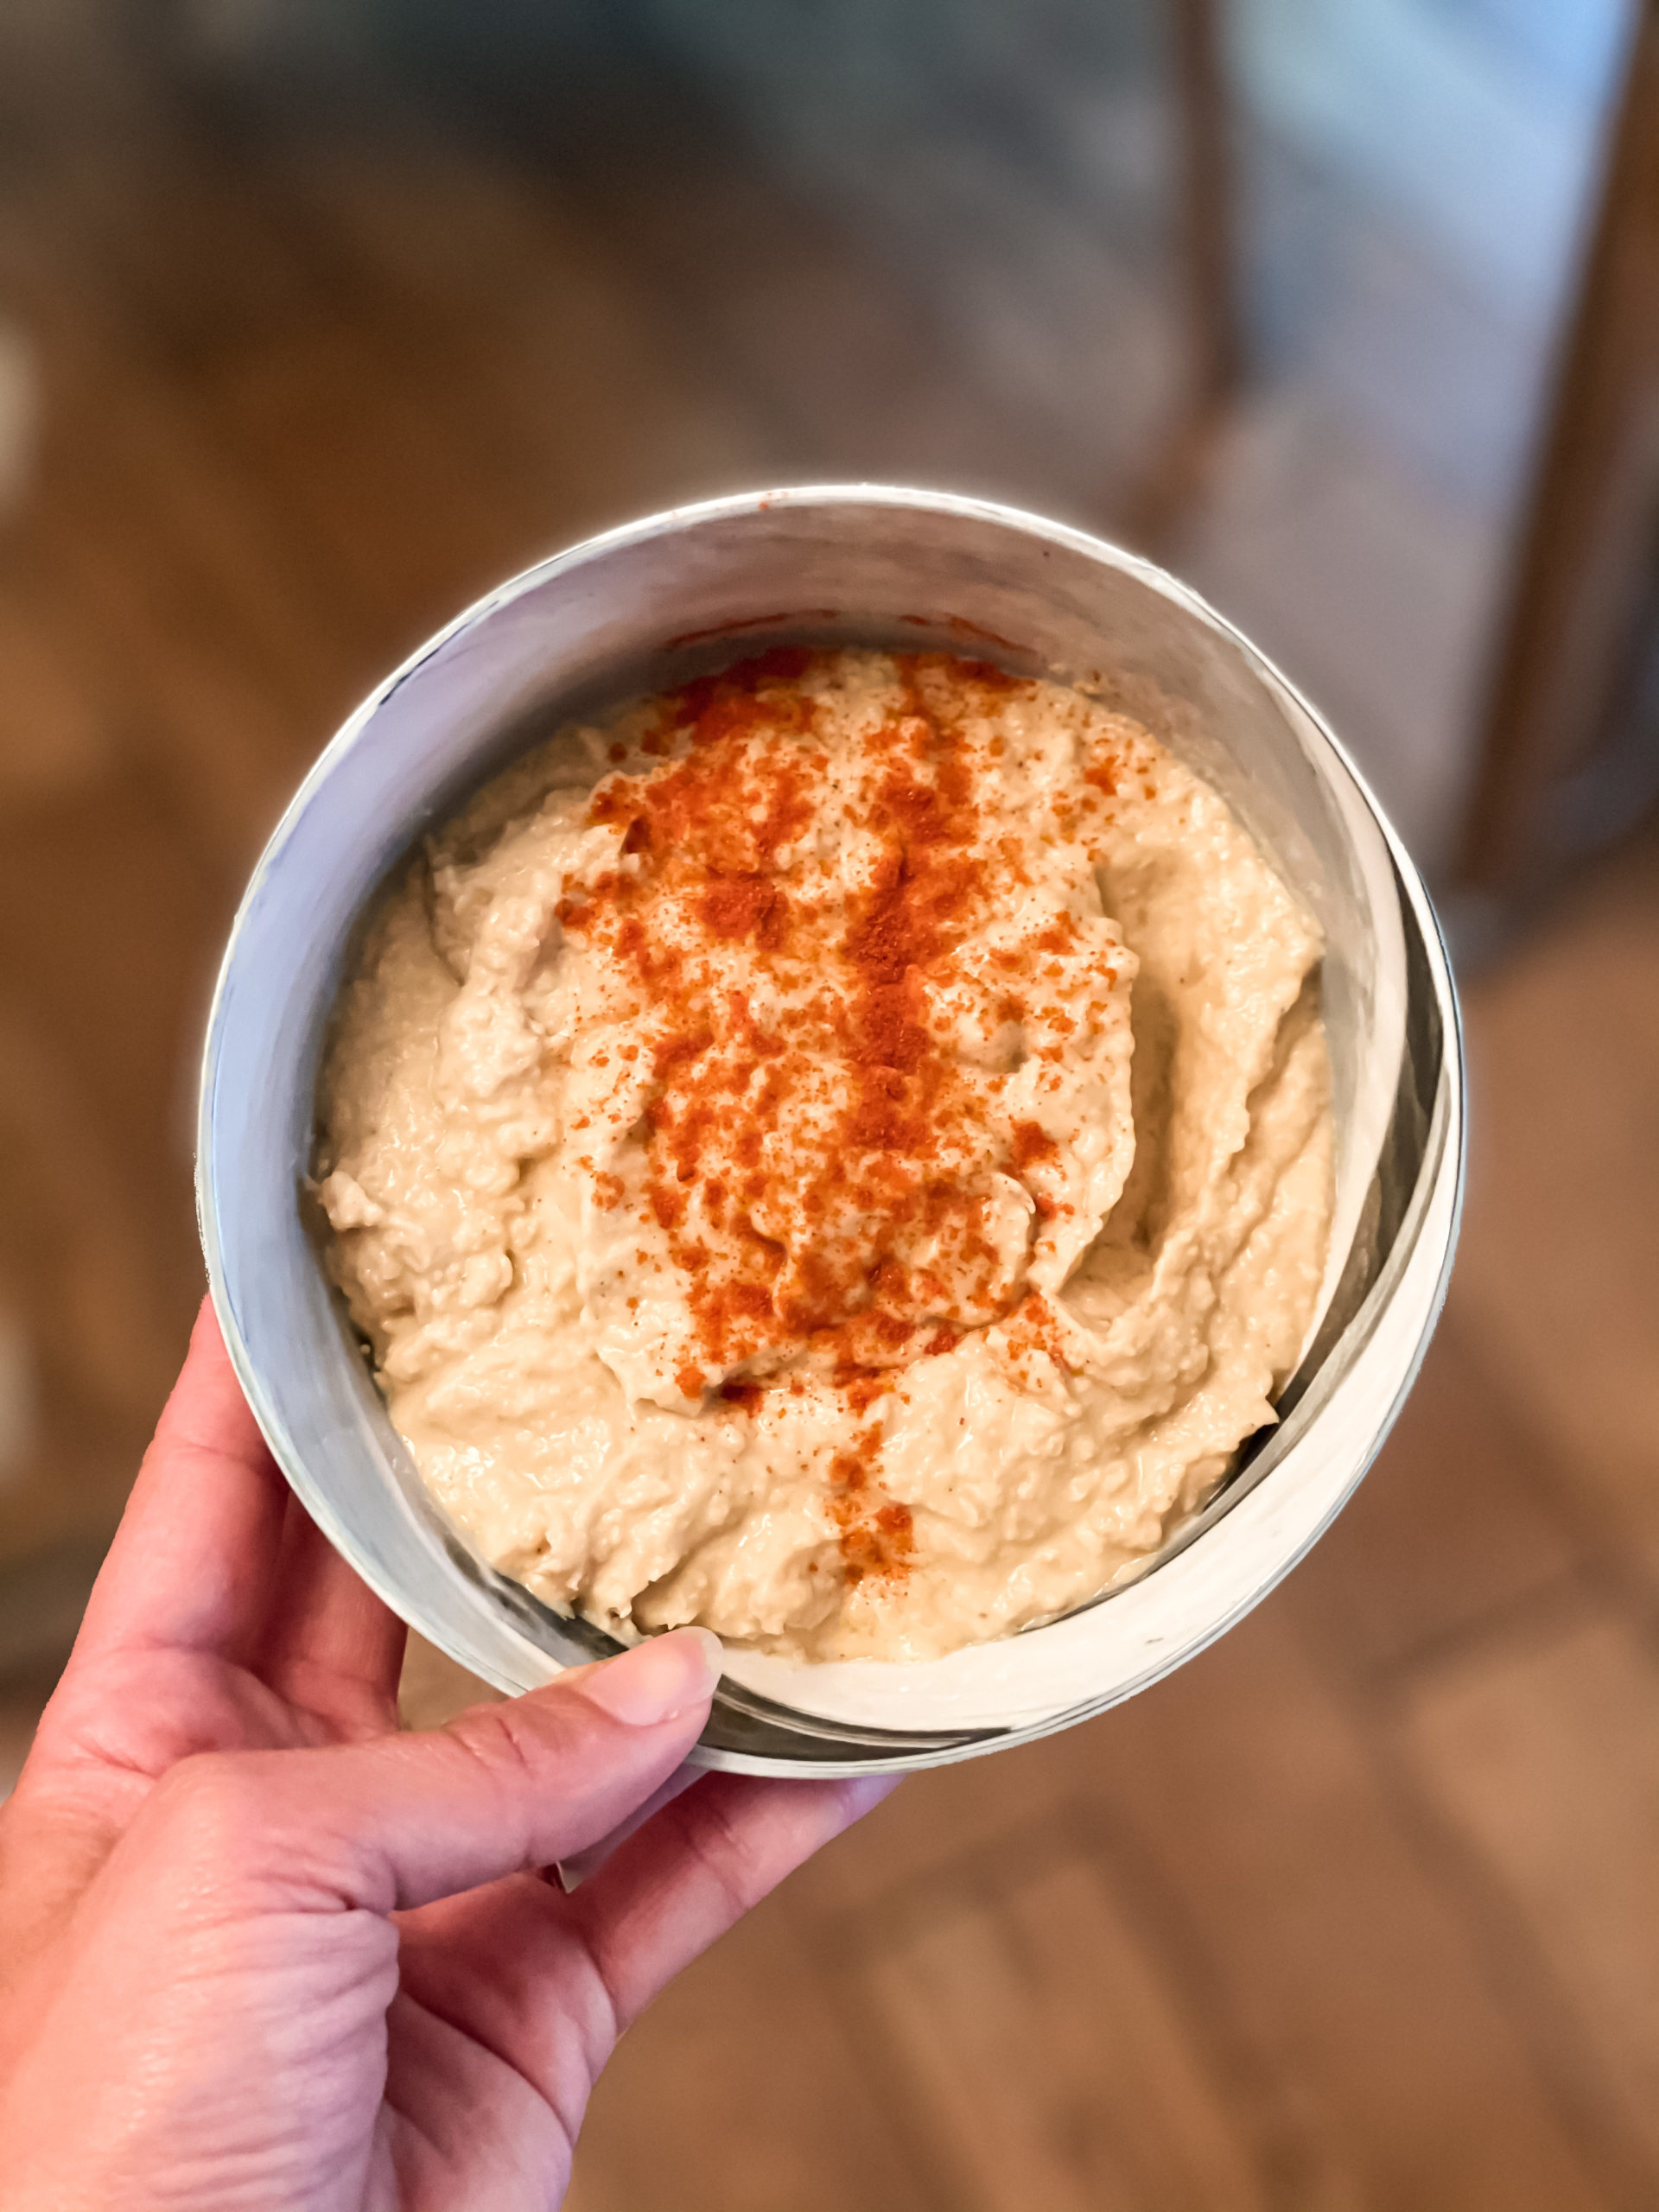 INSIDEOUT - Easy hummus article